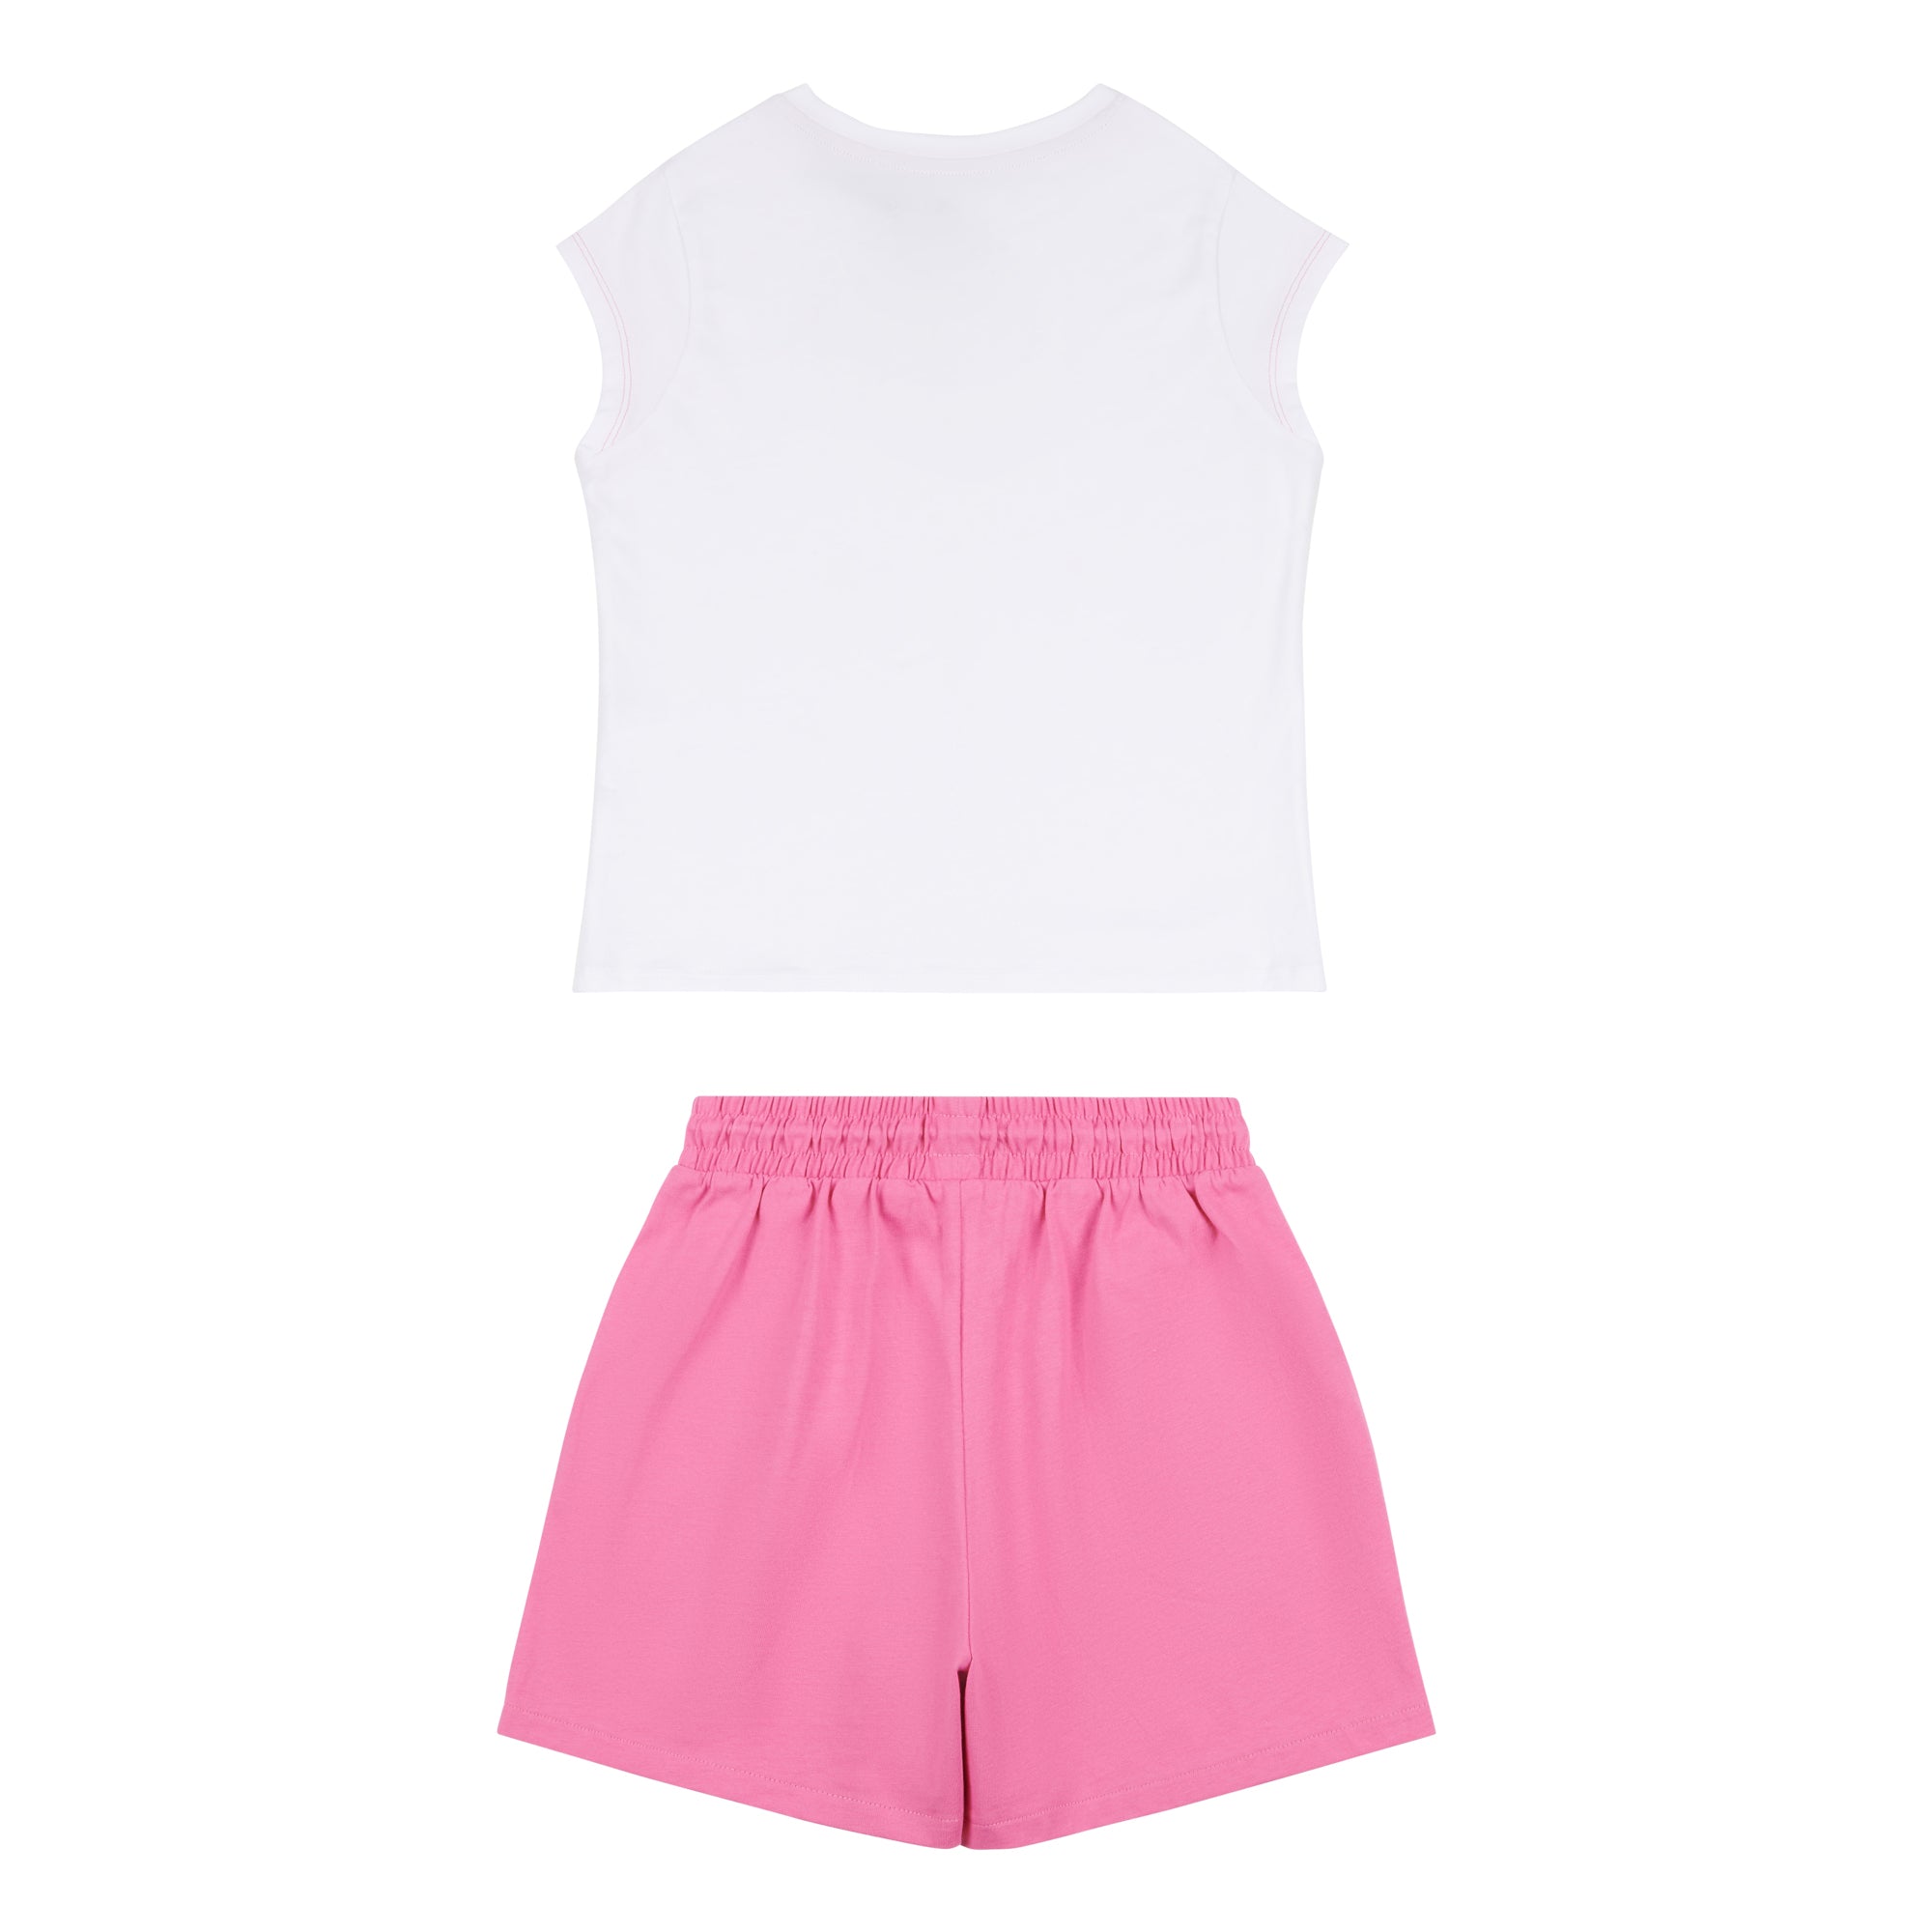 Girls Ombre Bermuda Shorts & T-Shirt Set in Bright White